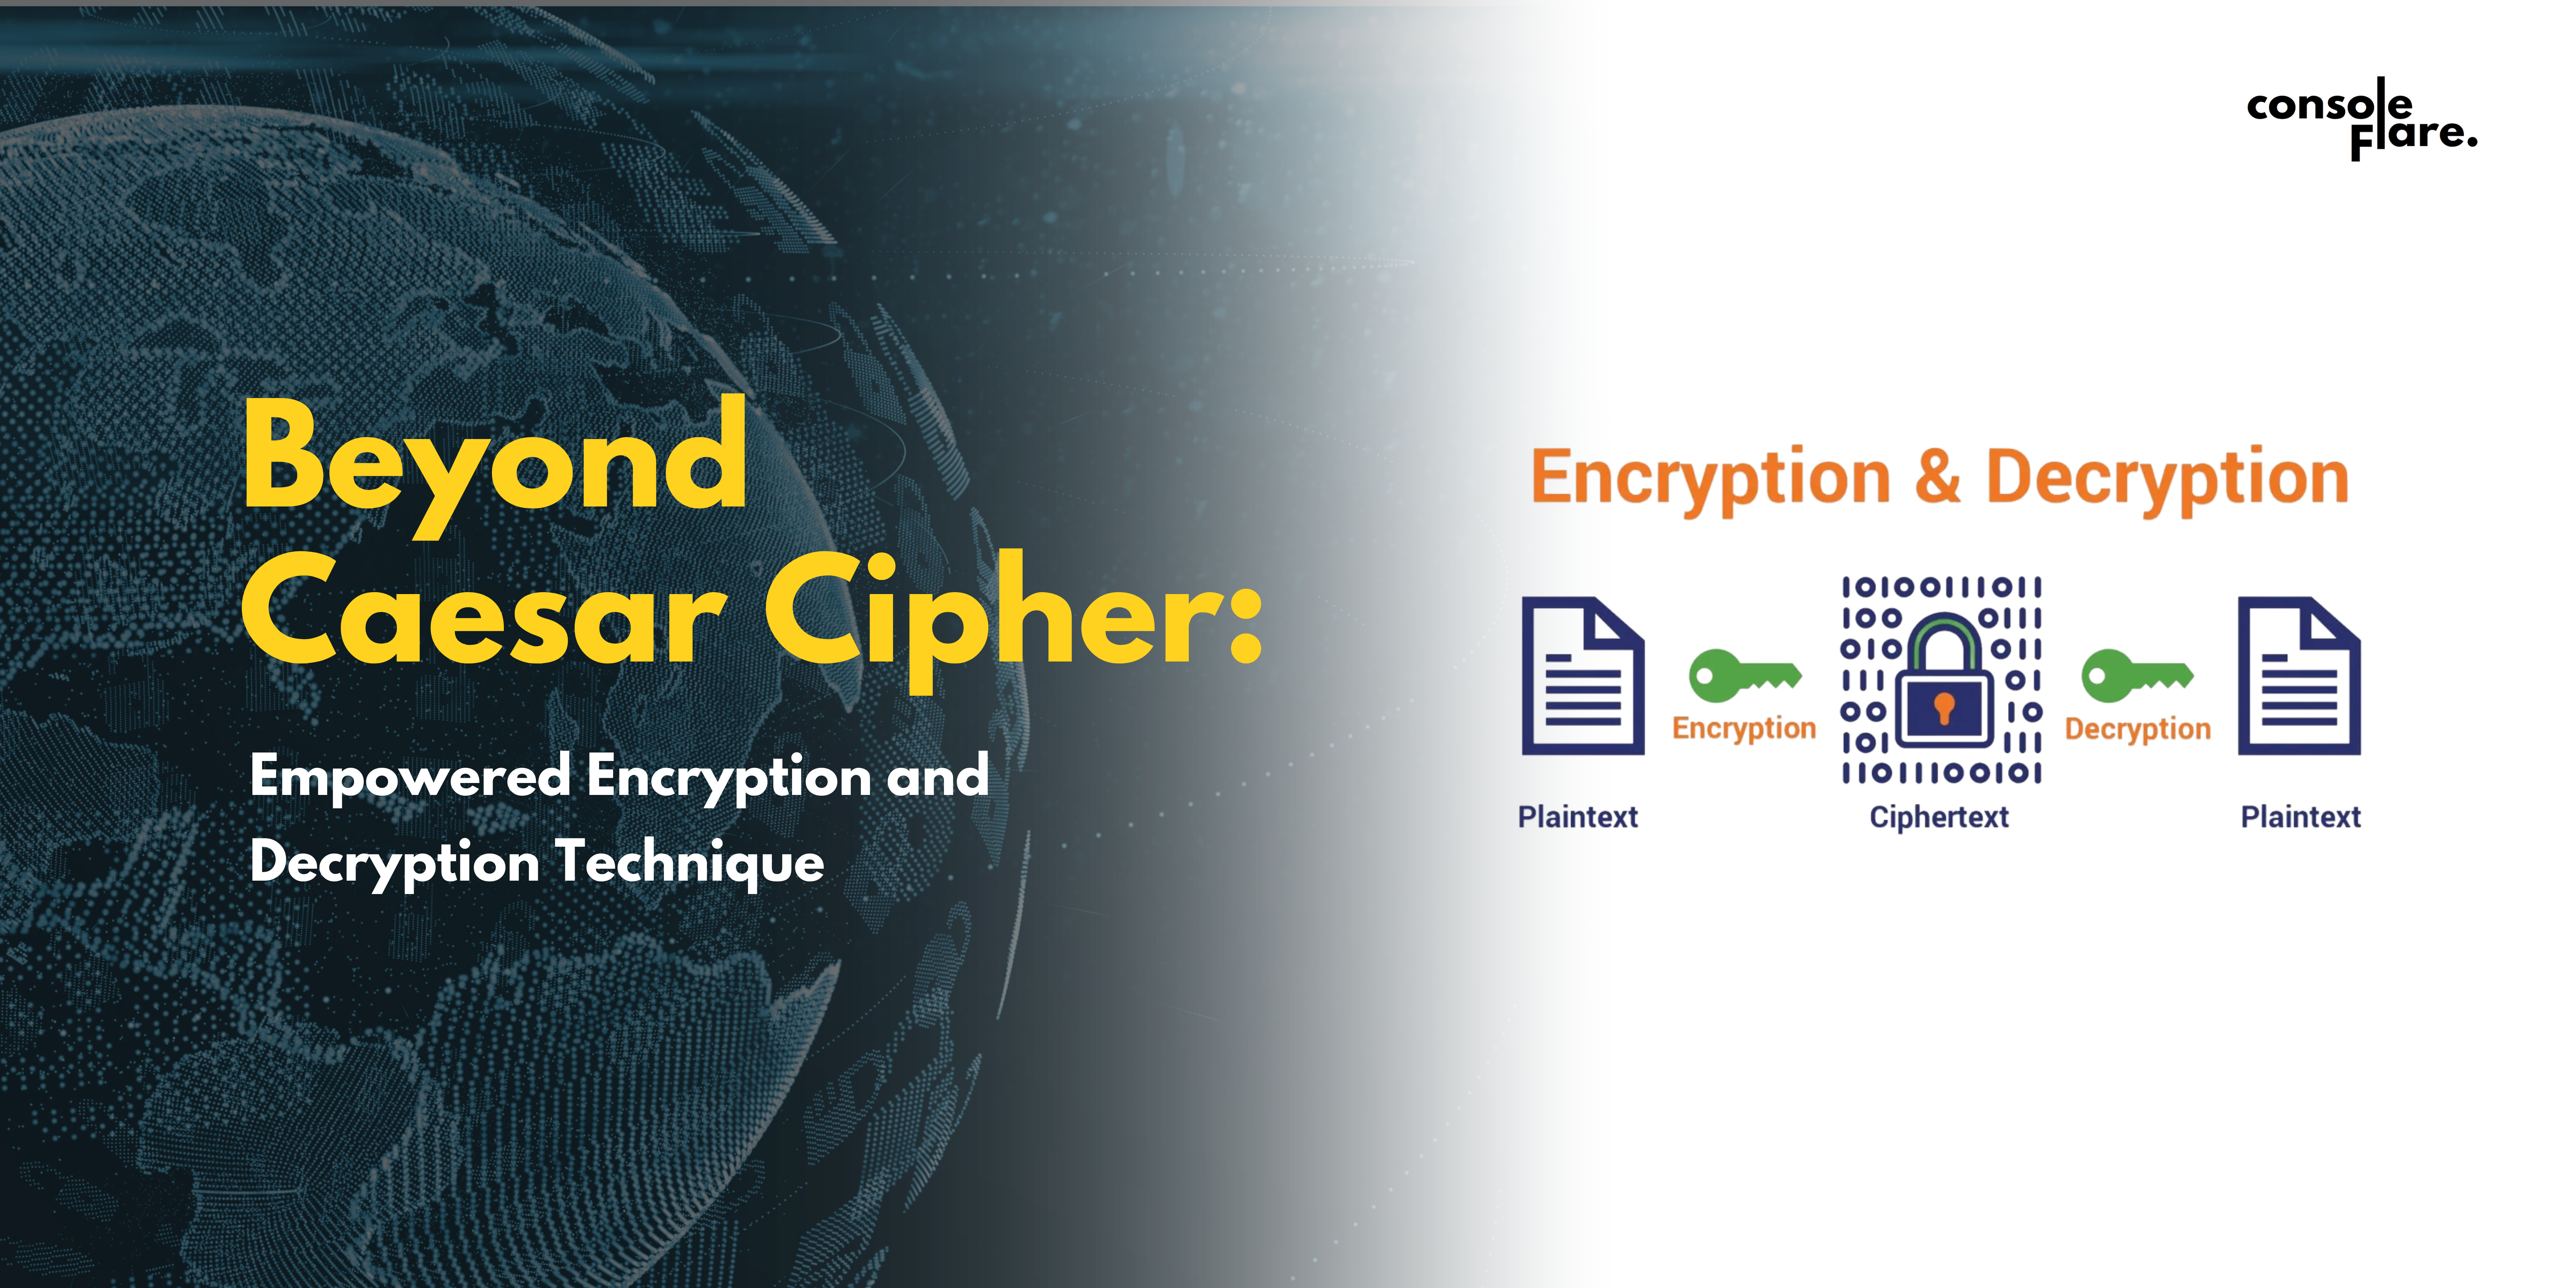 Beyond Caesar Cipher: Empowered Encryption and decryption in 5 steps